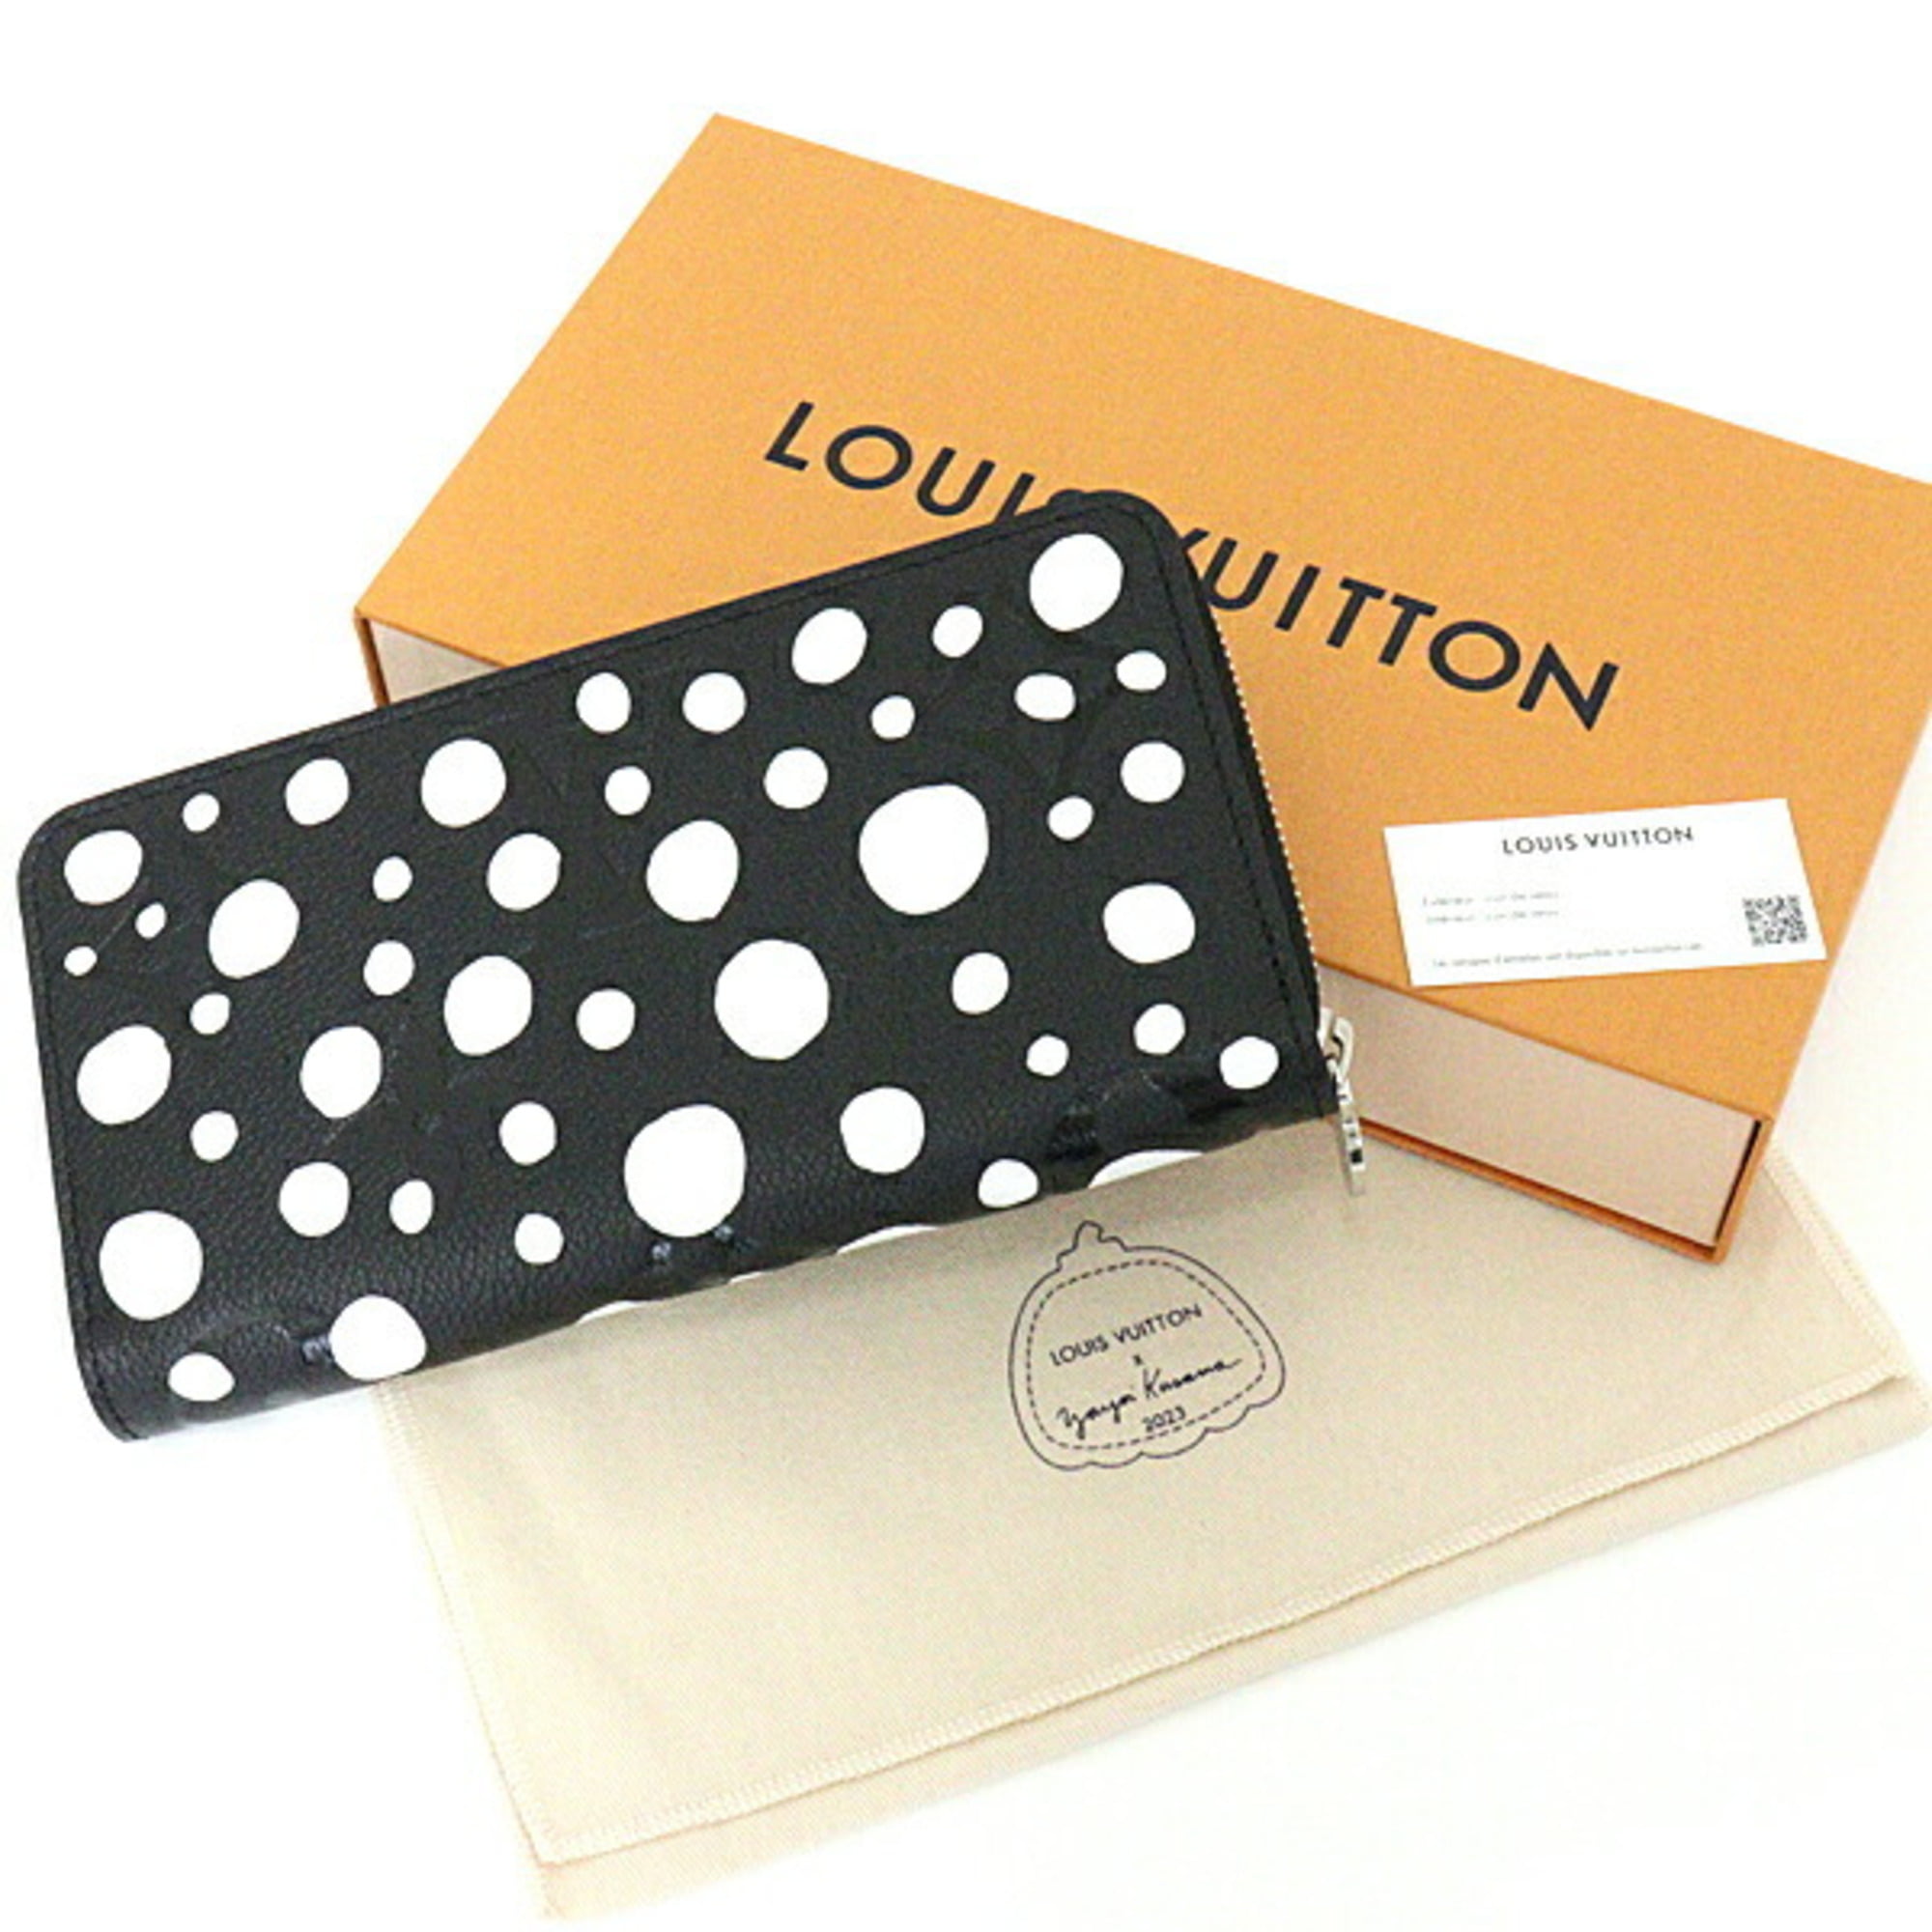 Authenticated Used Louis Vuitton Long Wallet Zippy White Yvoire